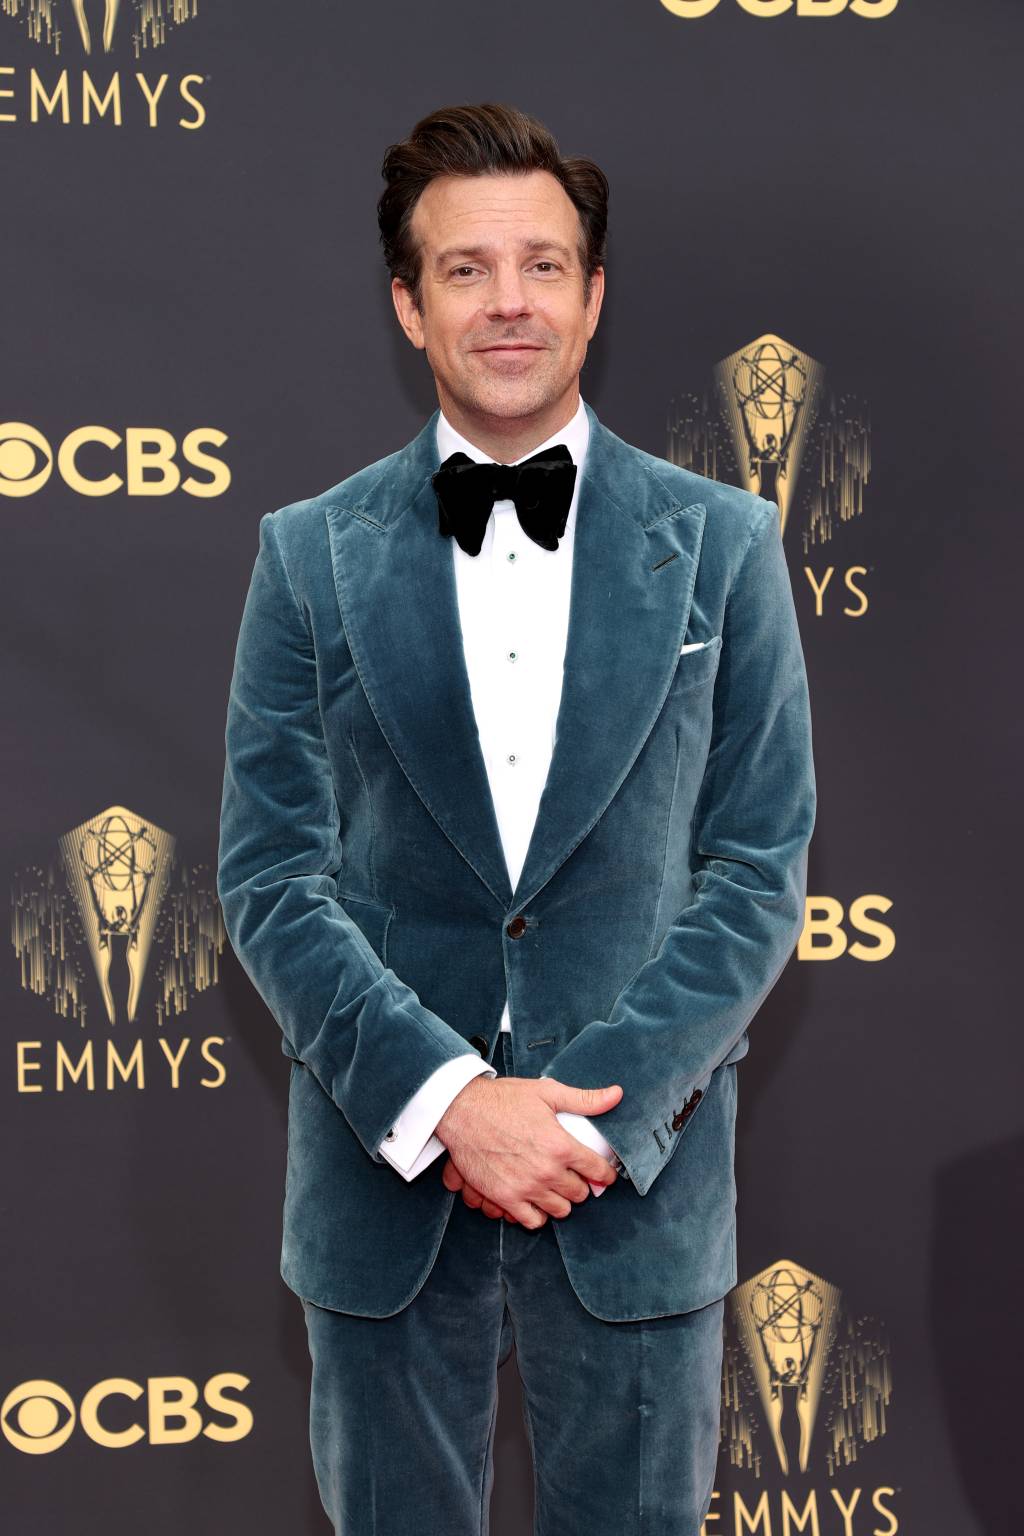 LOS ANGELES, CALIFORNIA - SEPTEMBER 19: Jason Sudeikis attends the 73rd Primetime Emmy Awards at L.A. LIVE on September 19, 2021 in Los Angeles, California. (Photo by Rich Fury/Getty Images)